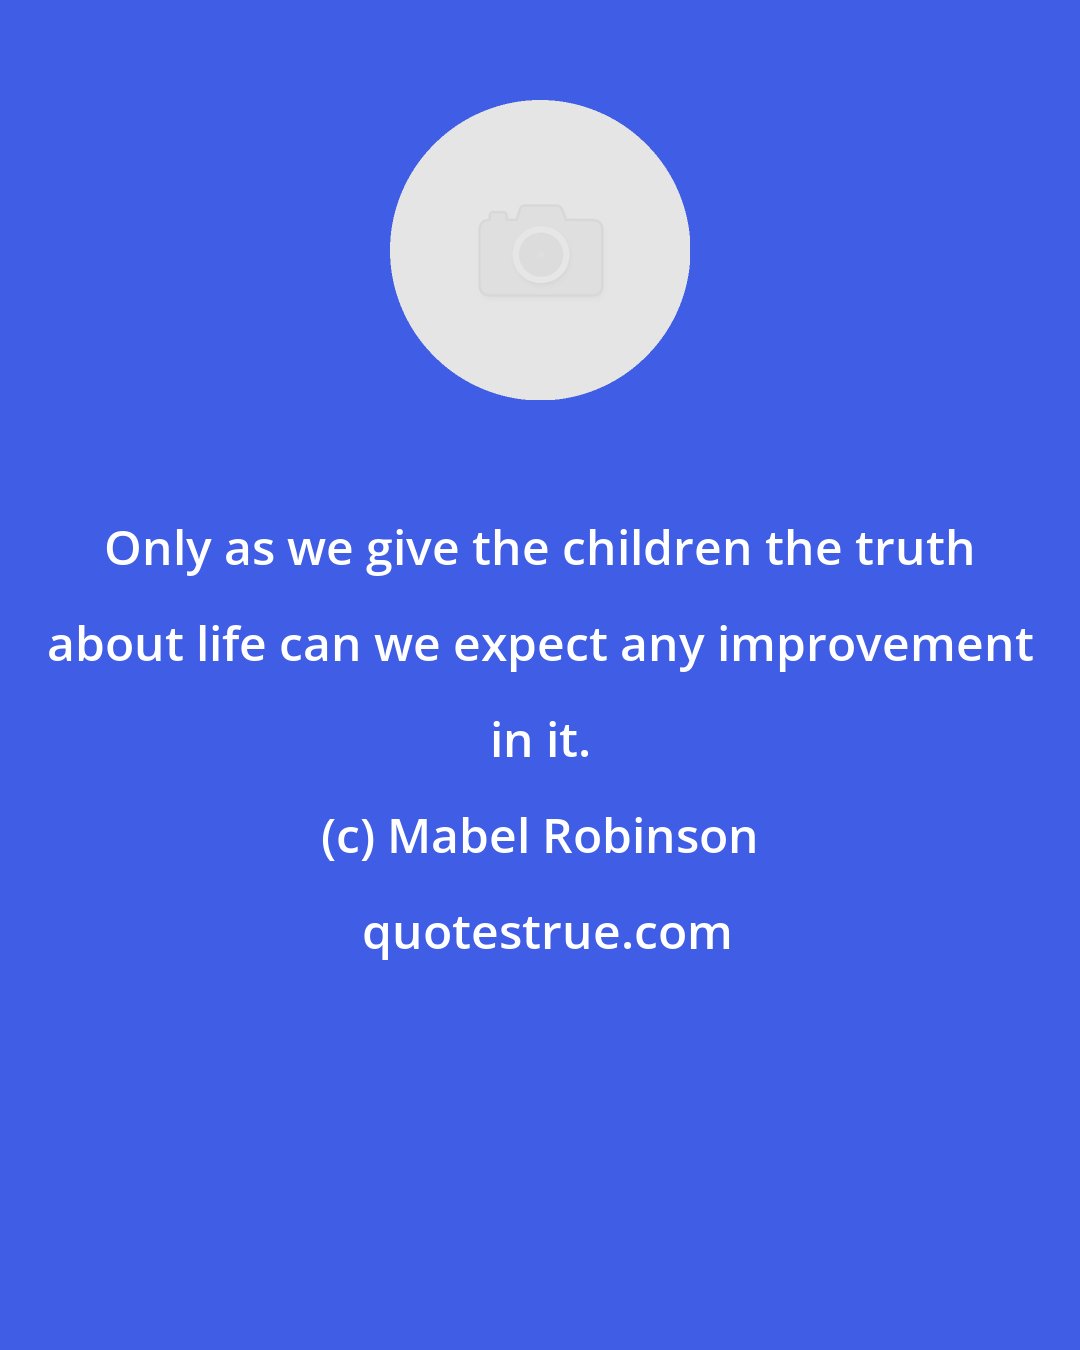 Mabel Robinson: Only as we give the children the truth about life can we expect any improvement in it.